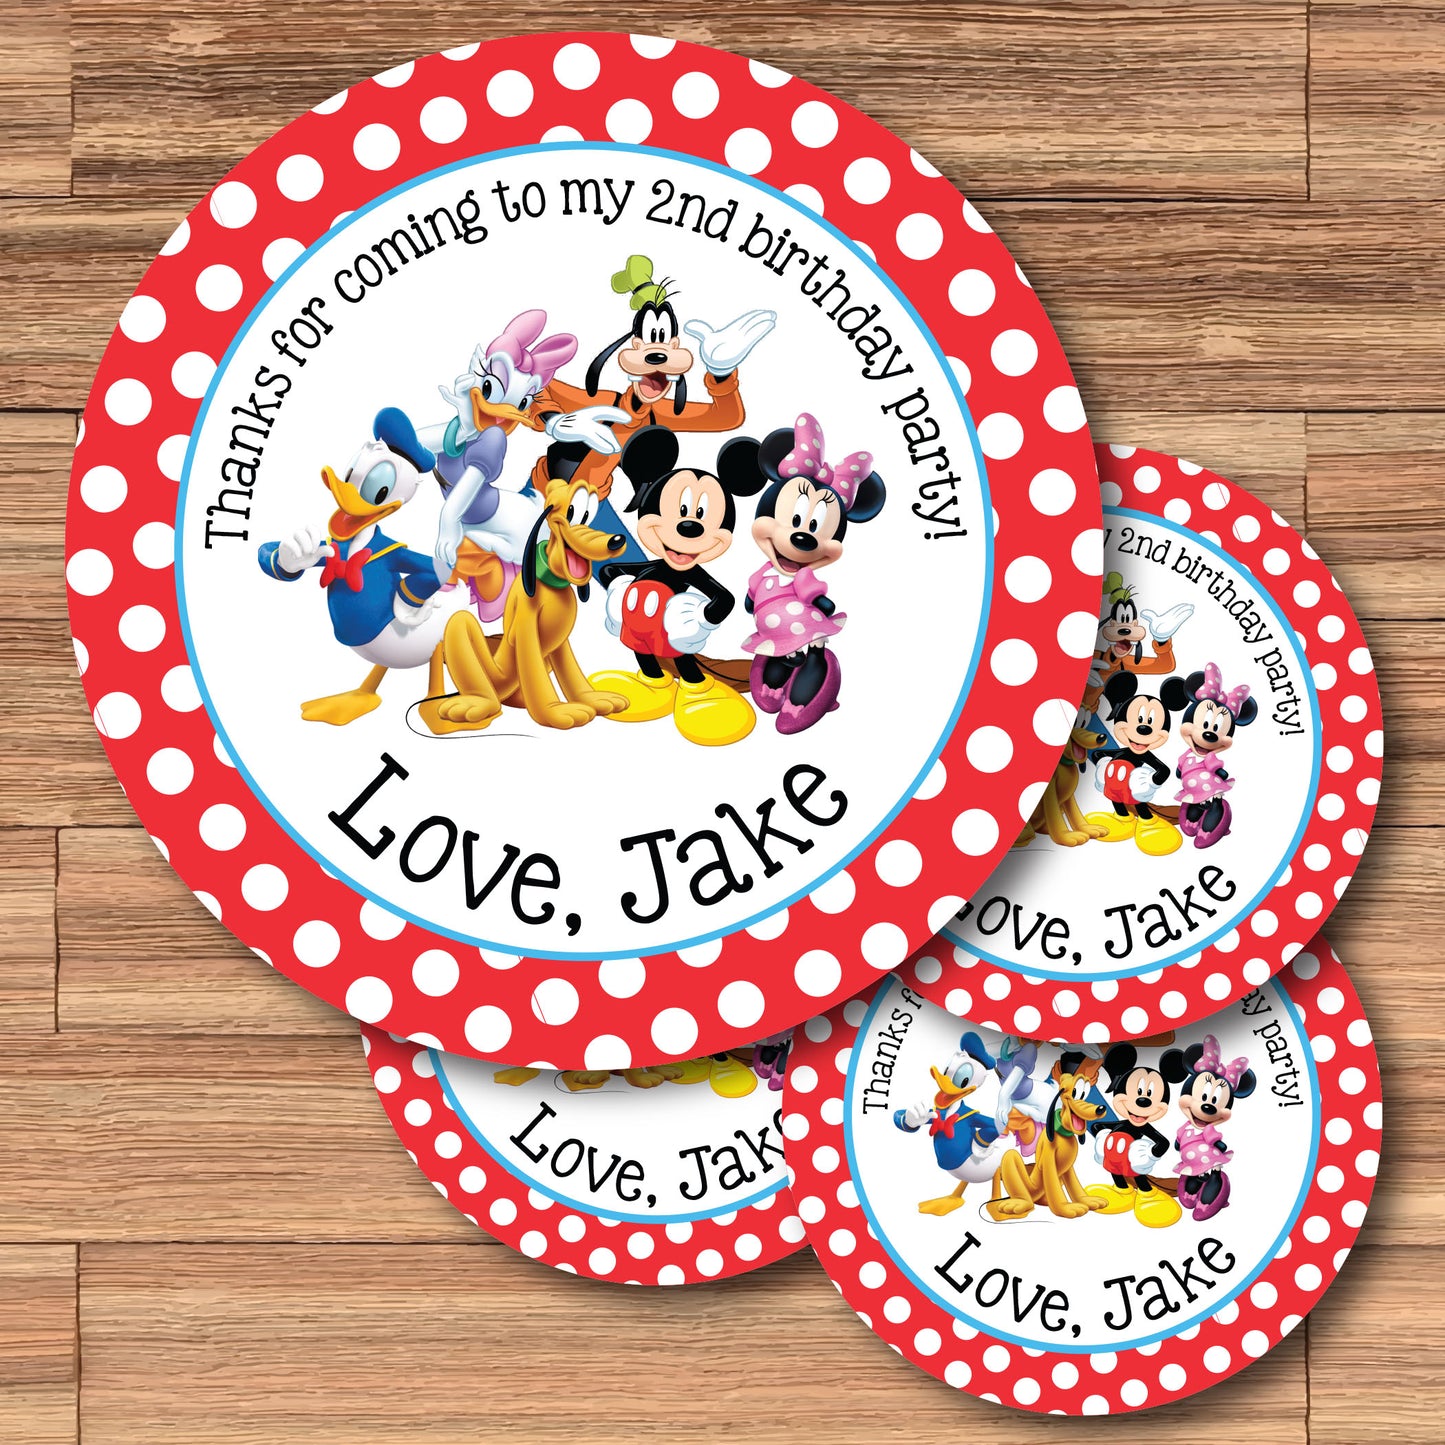 MICKEY MOUSE CLUBHOUSE Custom Red Polka-dot Stickers for Gift Bags, Party Favors! Printed or Digital!